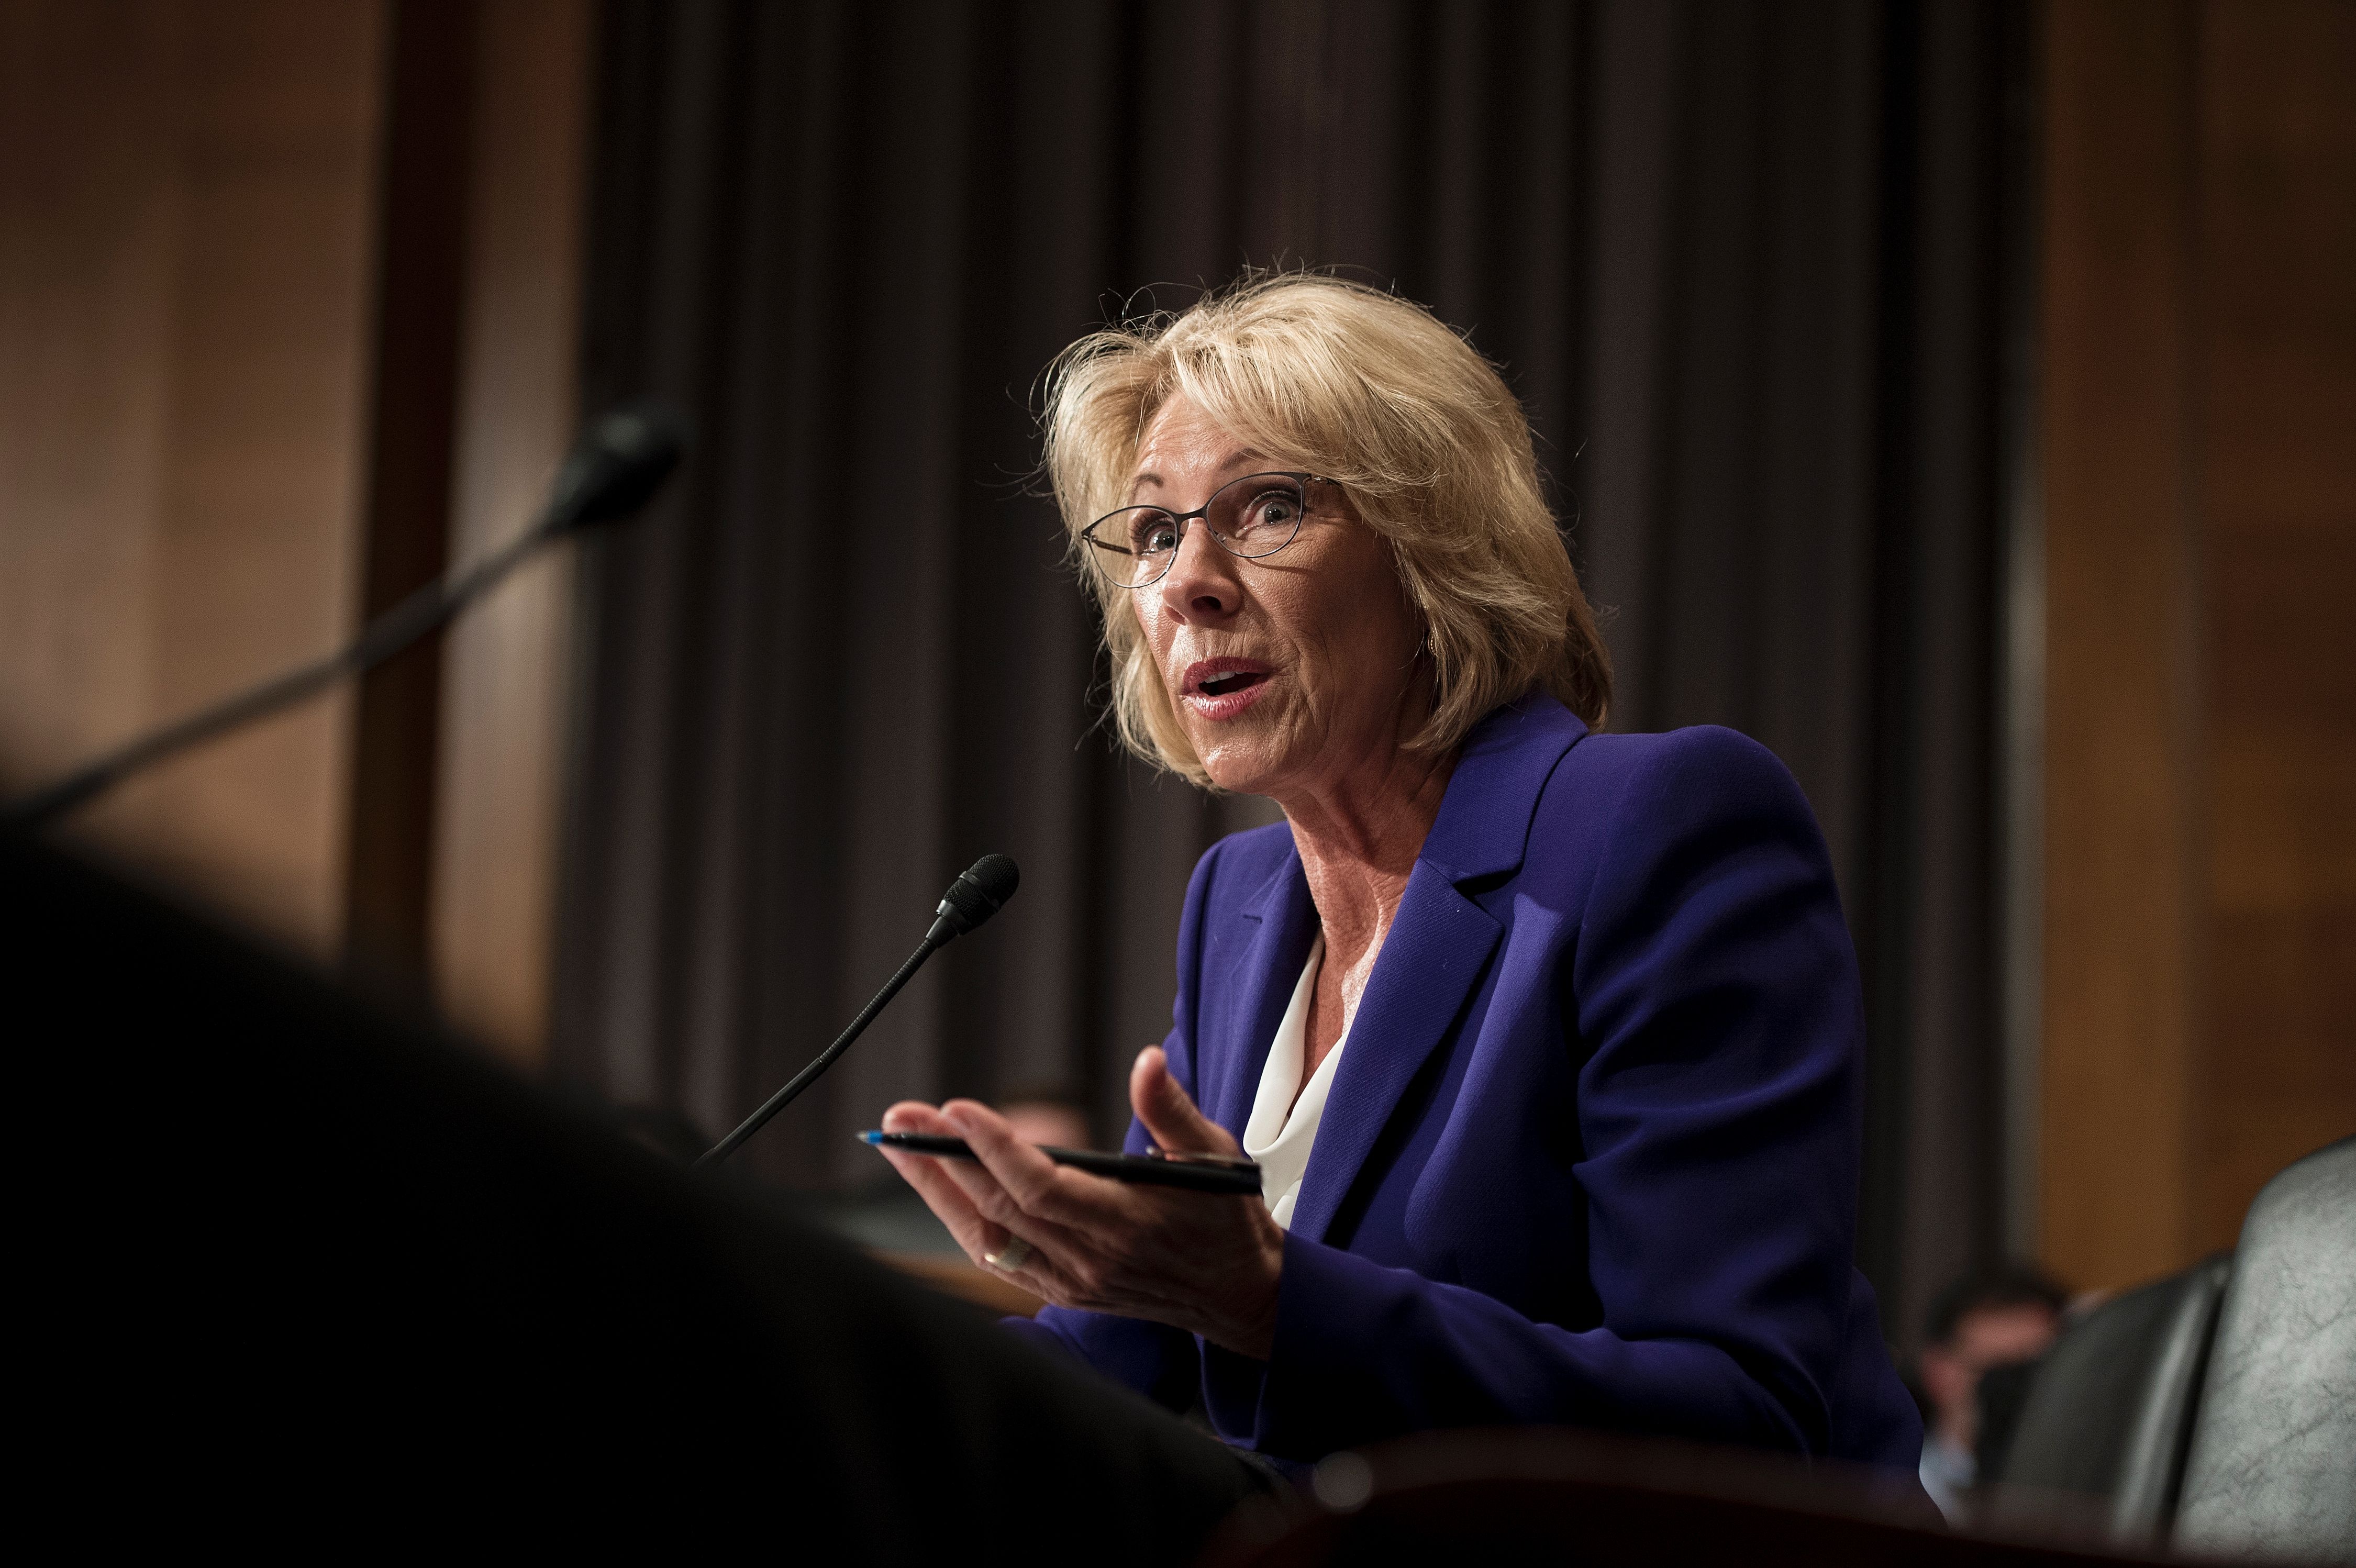 Betsy DeVos speaks during her confirmation hearing for Secretary of Education before the Senate Health, Education, Labor, and Pensions Committee on Capitol Hill.